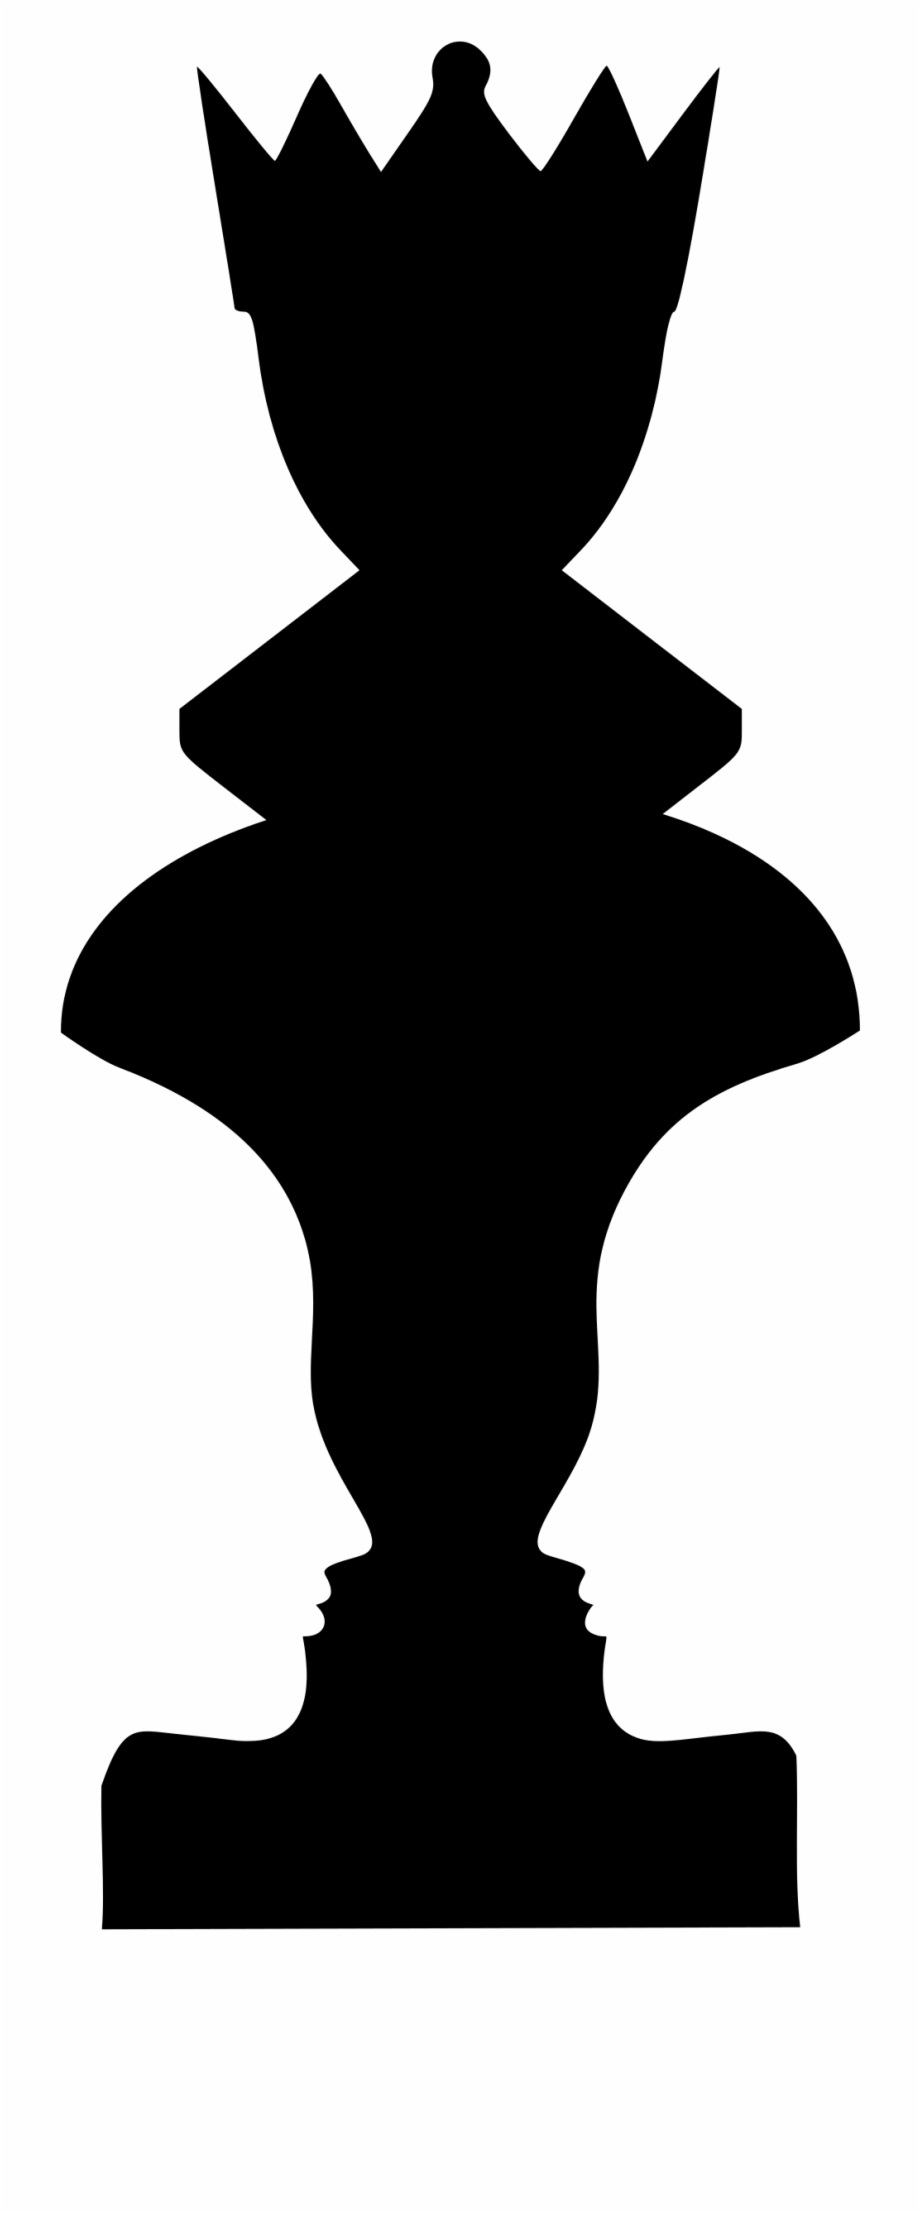 Jpg Freeuse Chess Piece Big Image Png Queen